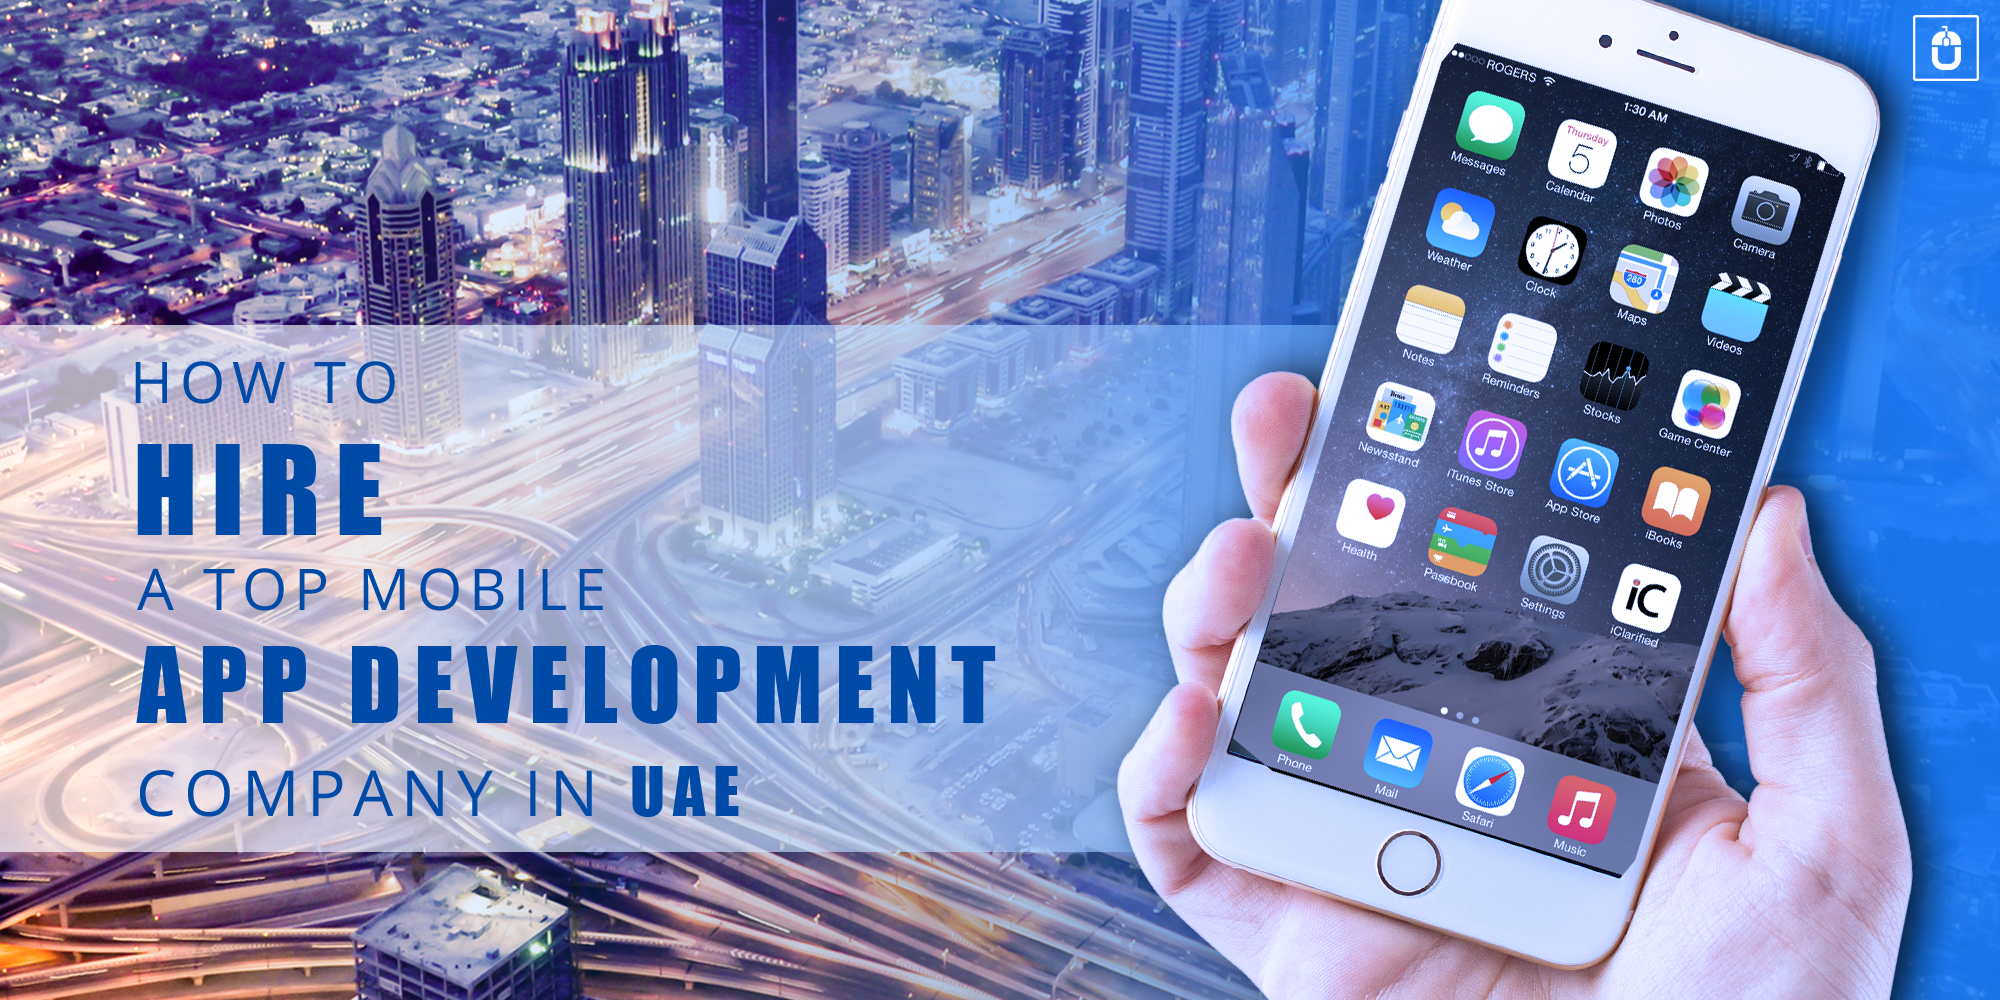 How to Hire a Top Mobile App Development Company in UAE